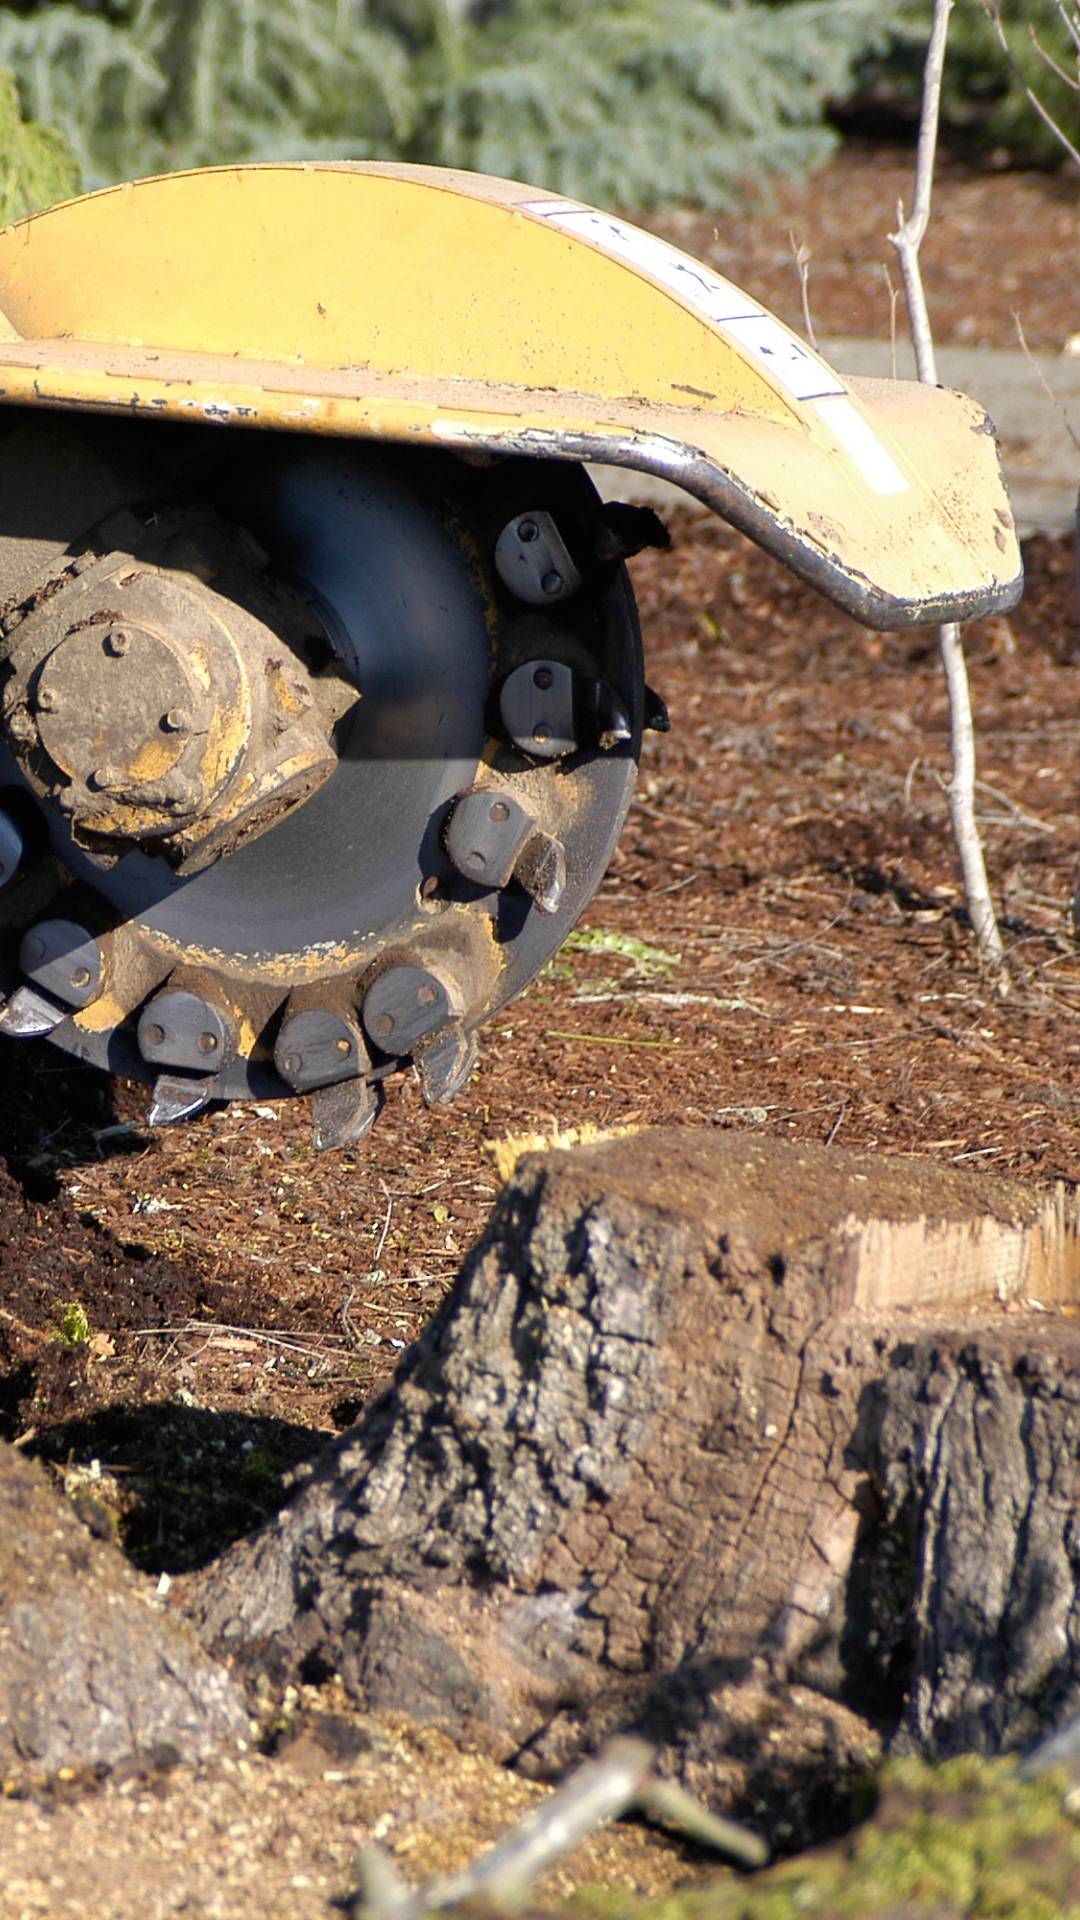 Extreme Tree Services is a top rated toledo stump grinding and tree stump removal company. A tree stump grinder is removing a stump in this image